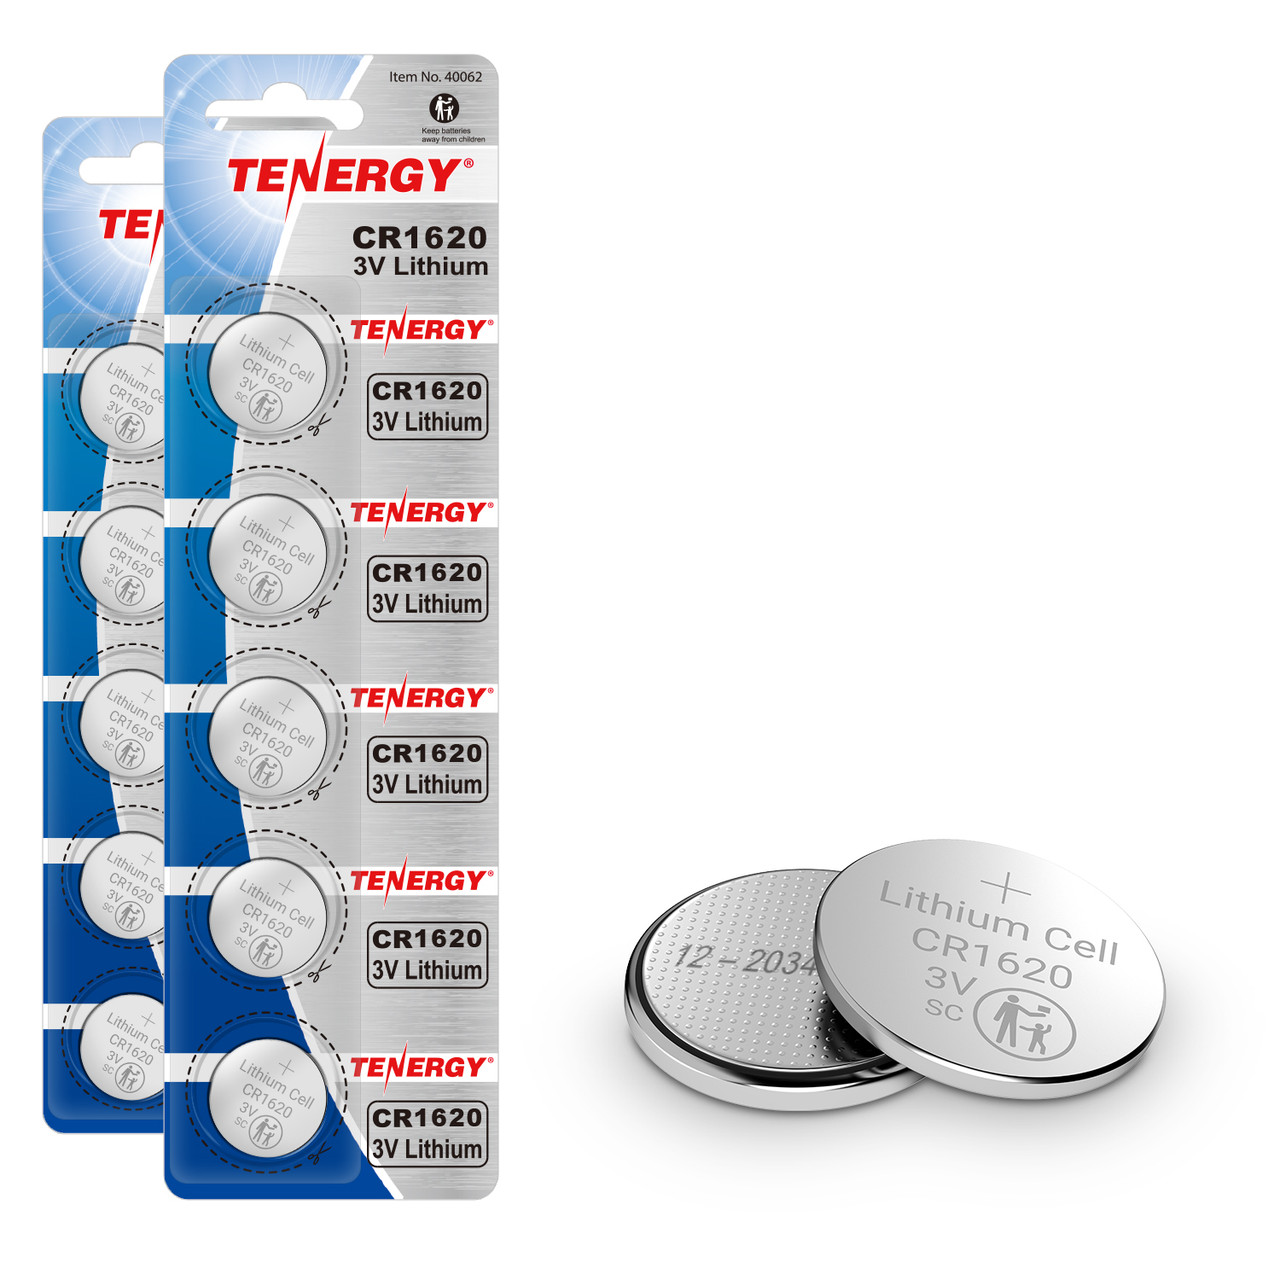 Tenergy CR2430 3V Lithium Button Cells 10 Pack (2 Cards)